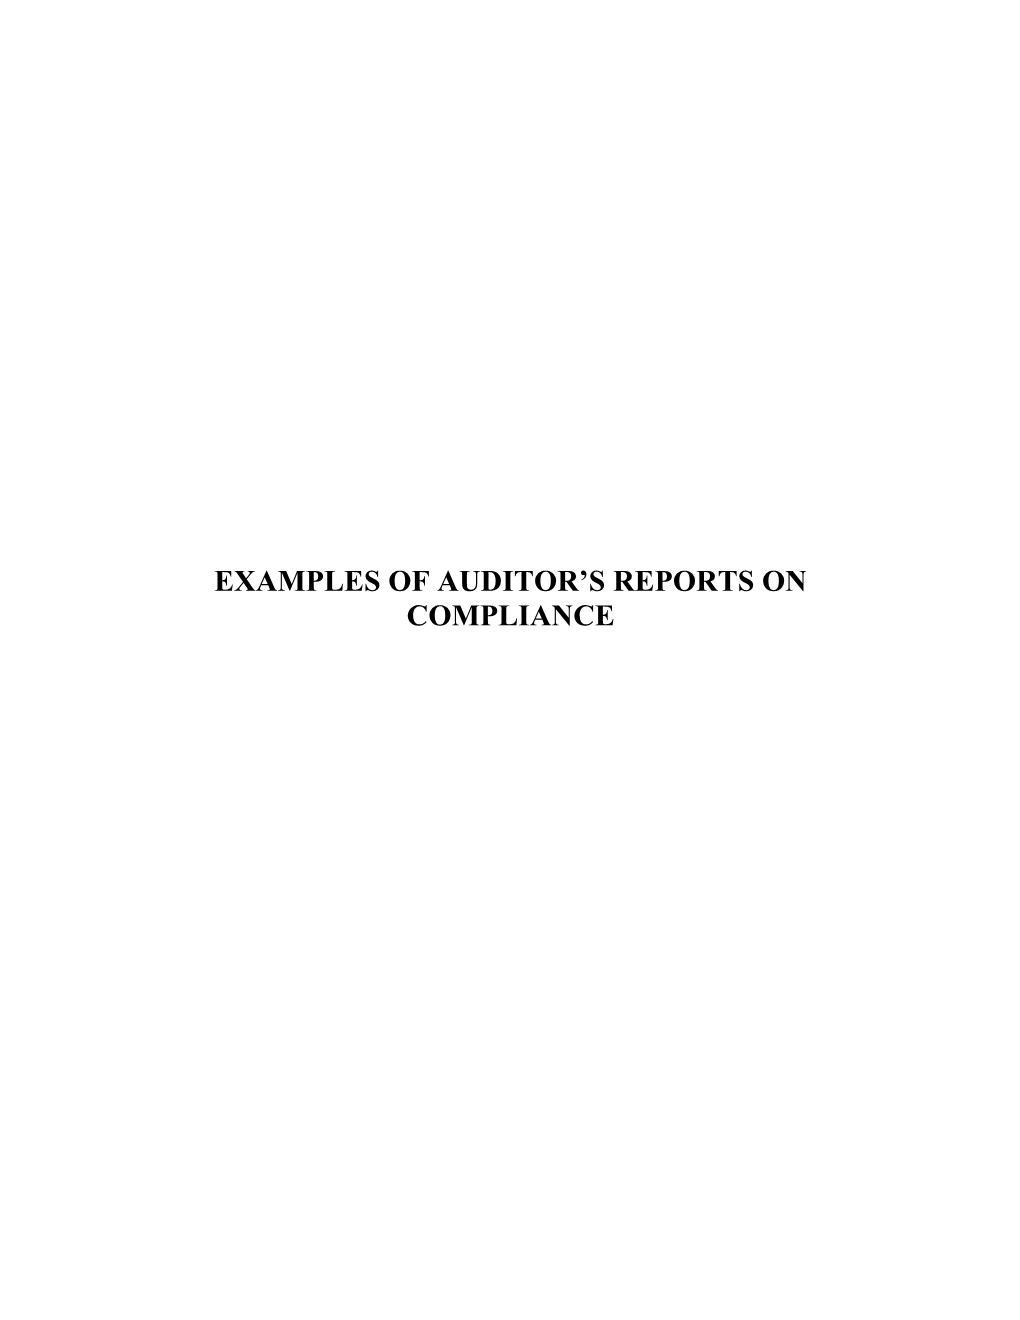 2009 Minnesota Legal Compliance Audit Guide for Local Governments Section 6 s1